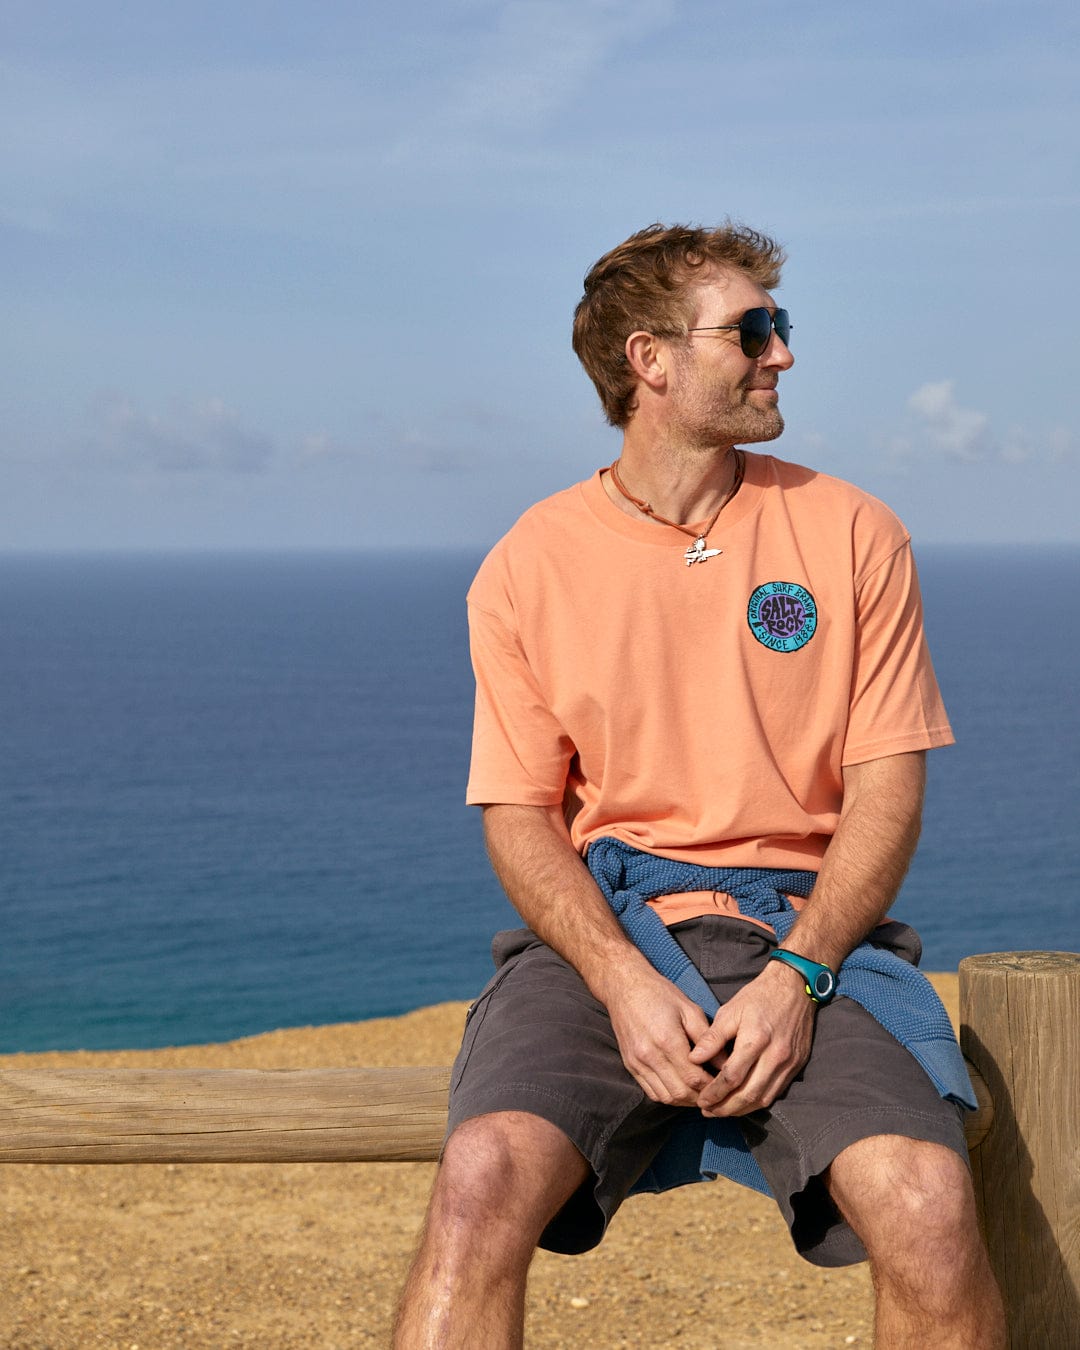 Man sitting on a wooden railing by the sea, enjoying the view on a sunny day, wearing an oversized Saltrock SR Originals mens short sleeve t-shirt in peach with a retro surf graphic.